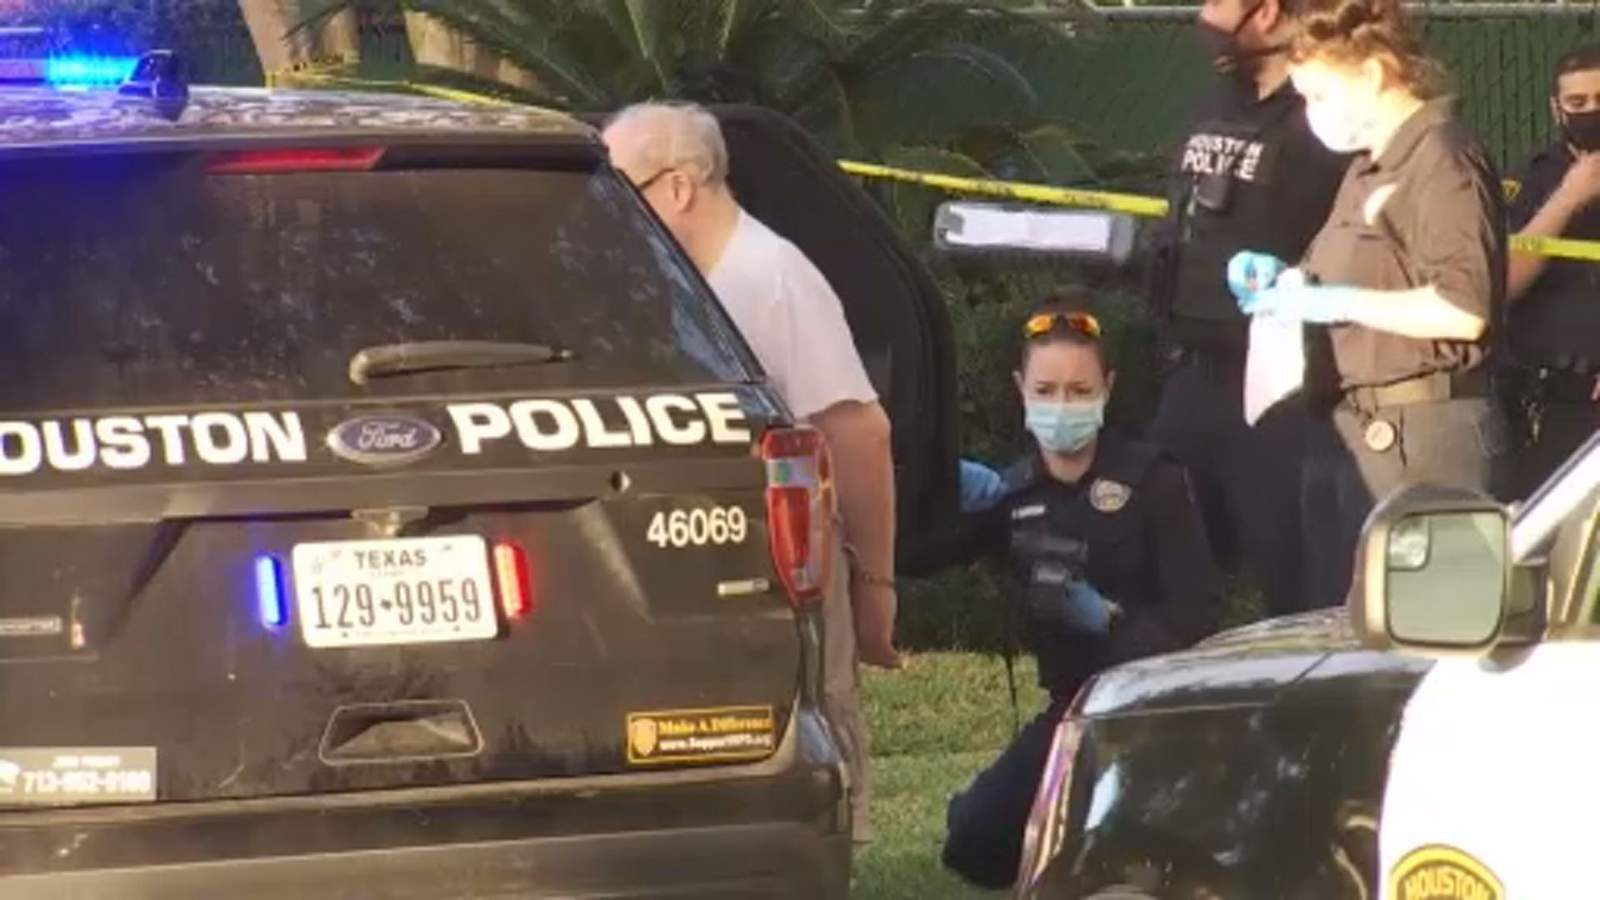 69-year-old man kills his 93-year-old mother in west Houston, police say